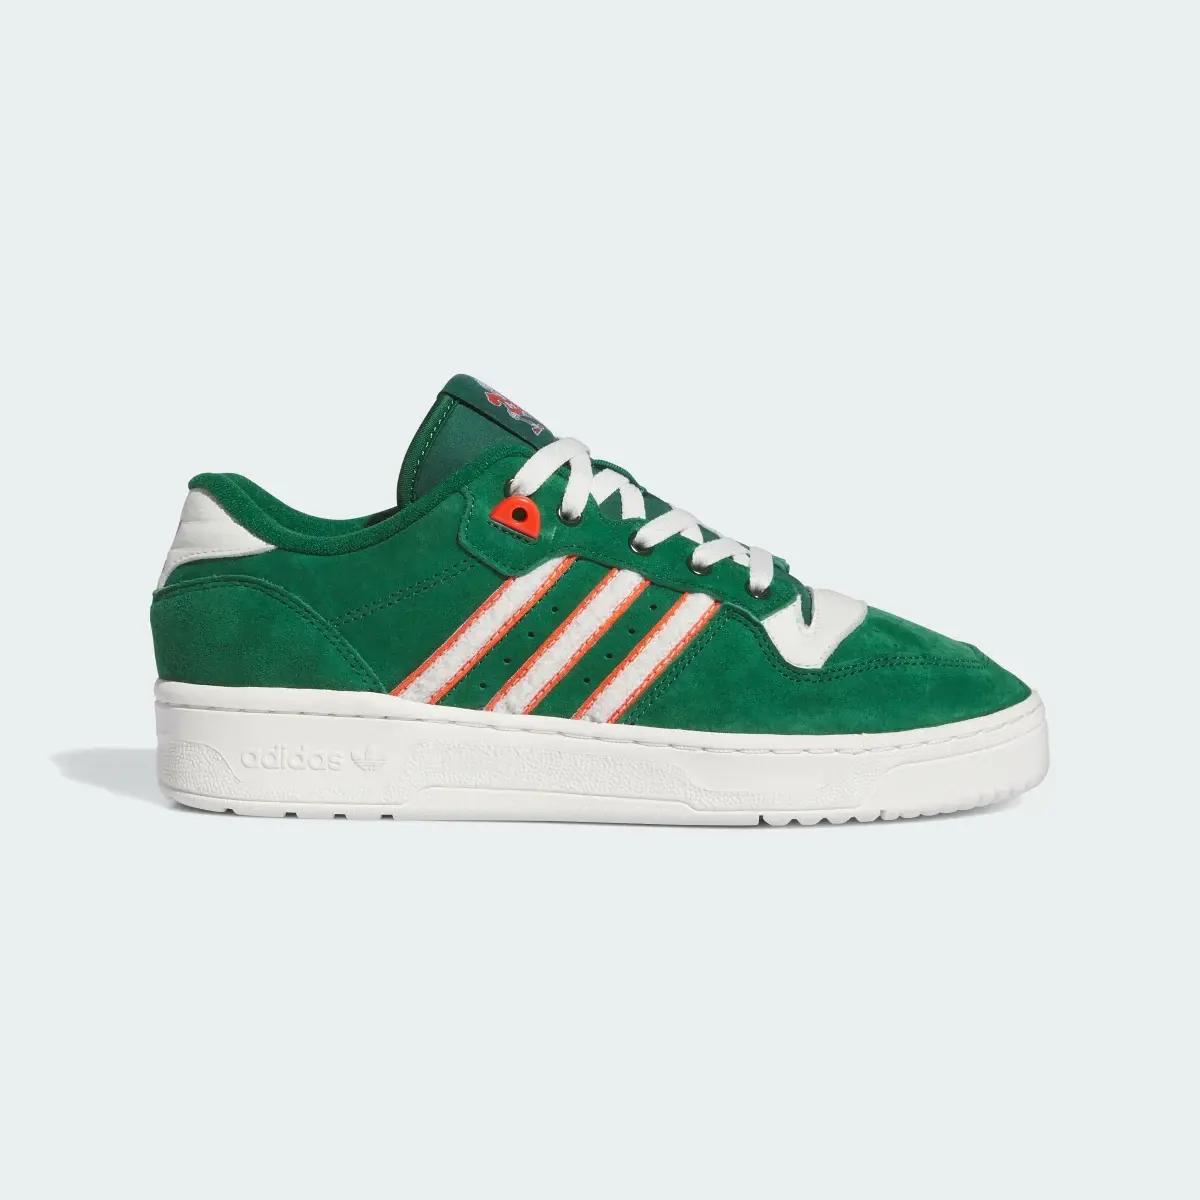 Adidas Miami Rivalry Low Shoes. 2